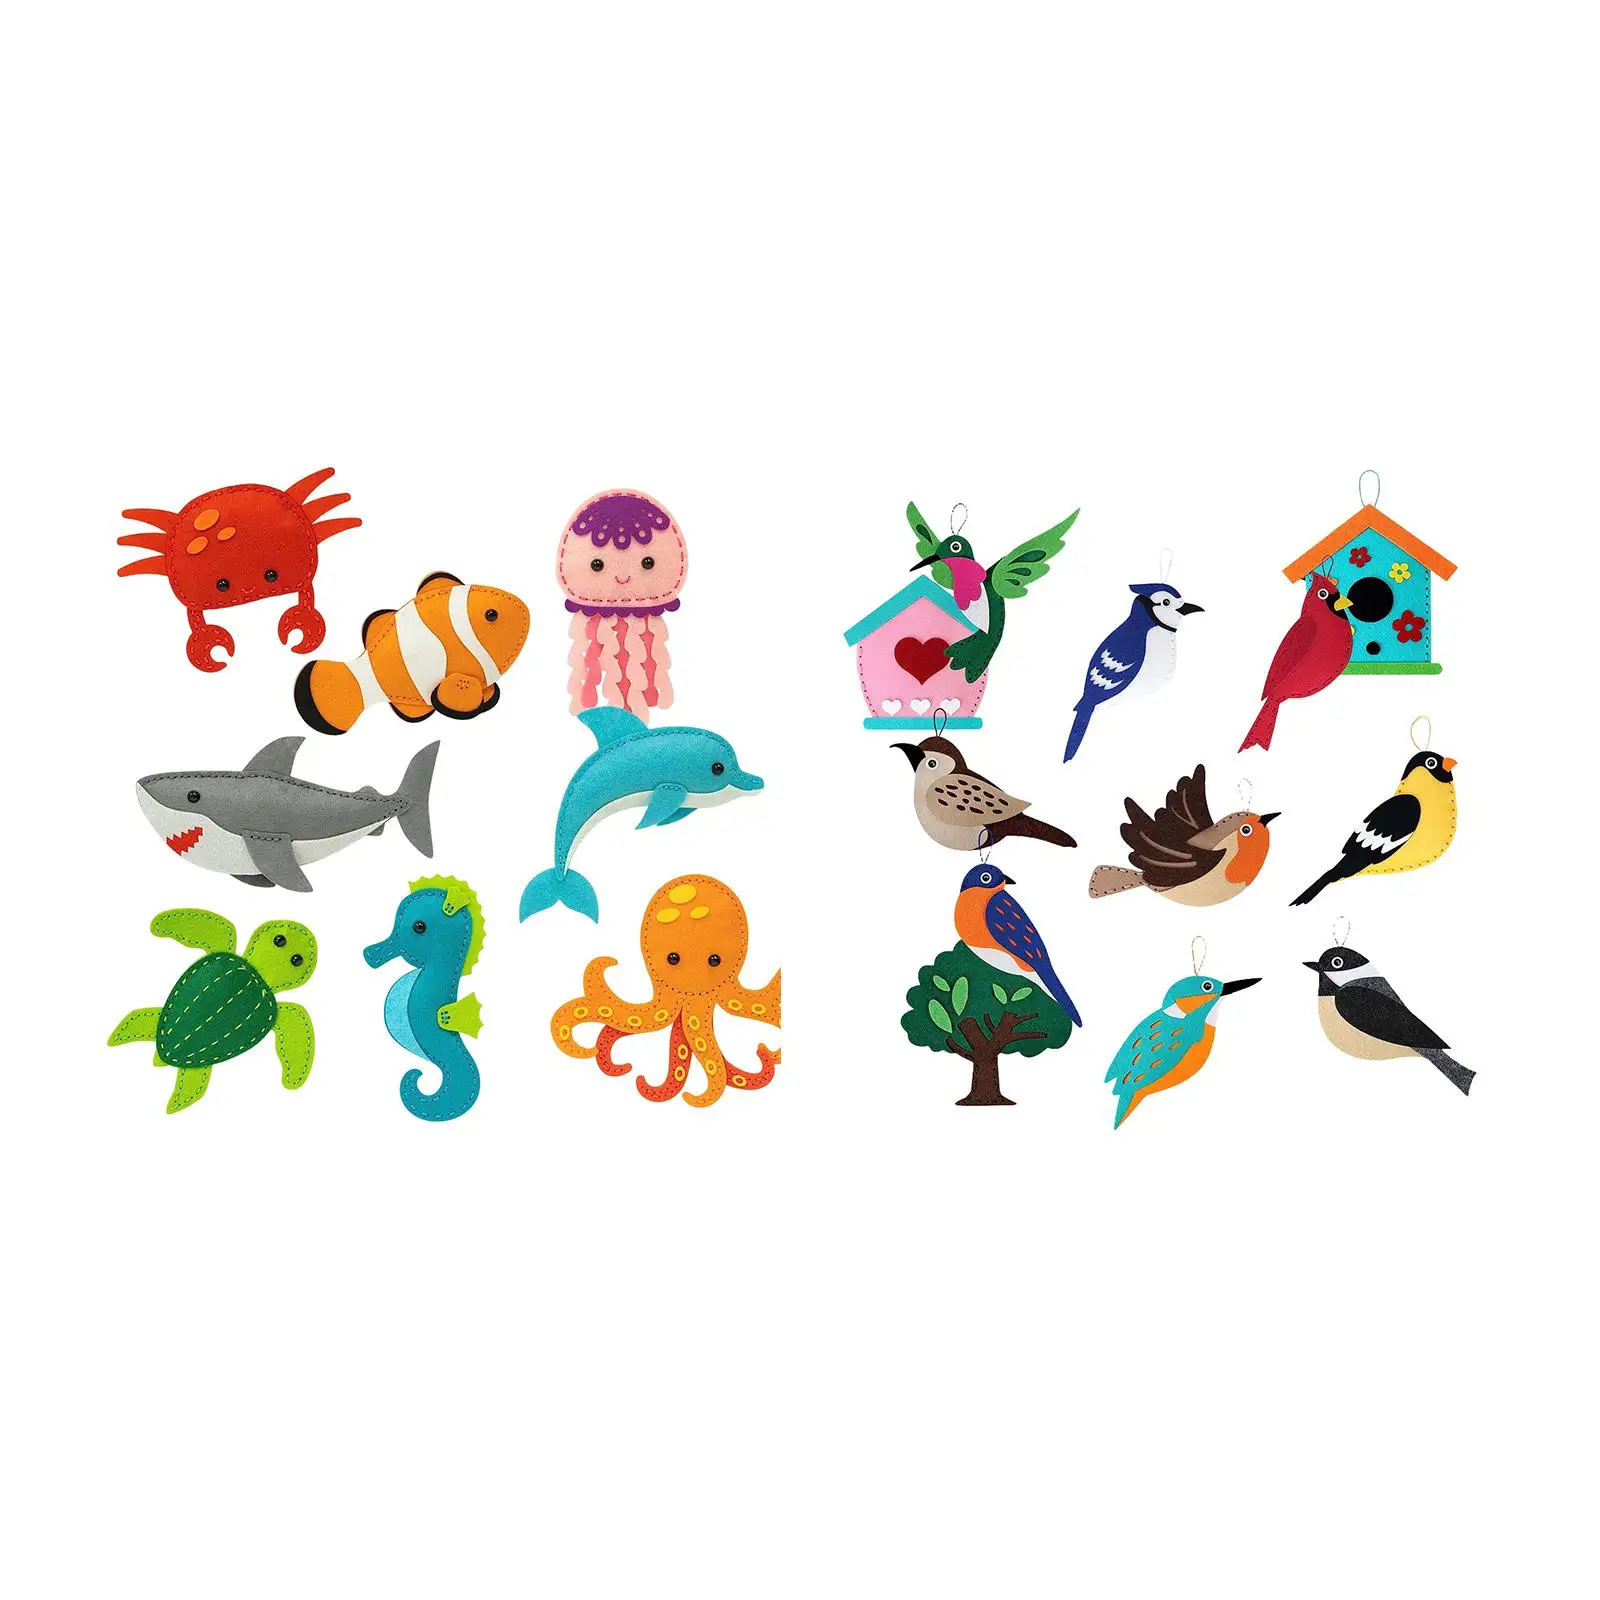 Felt Sewing Kits Animals Sewing for Kids Fish and Birds Nursery Sewing for Kids for Children